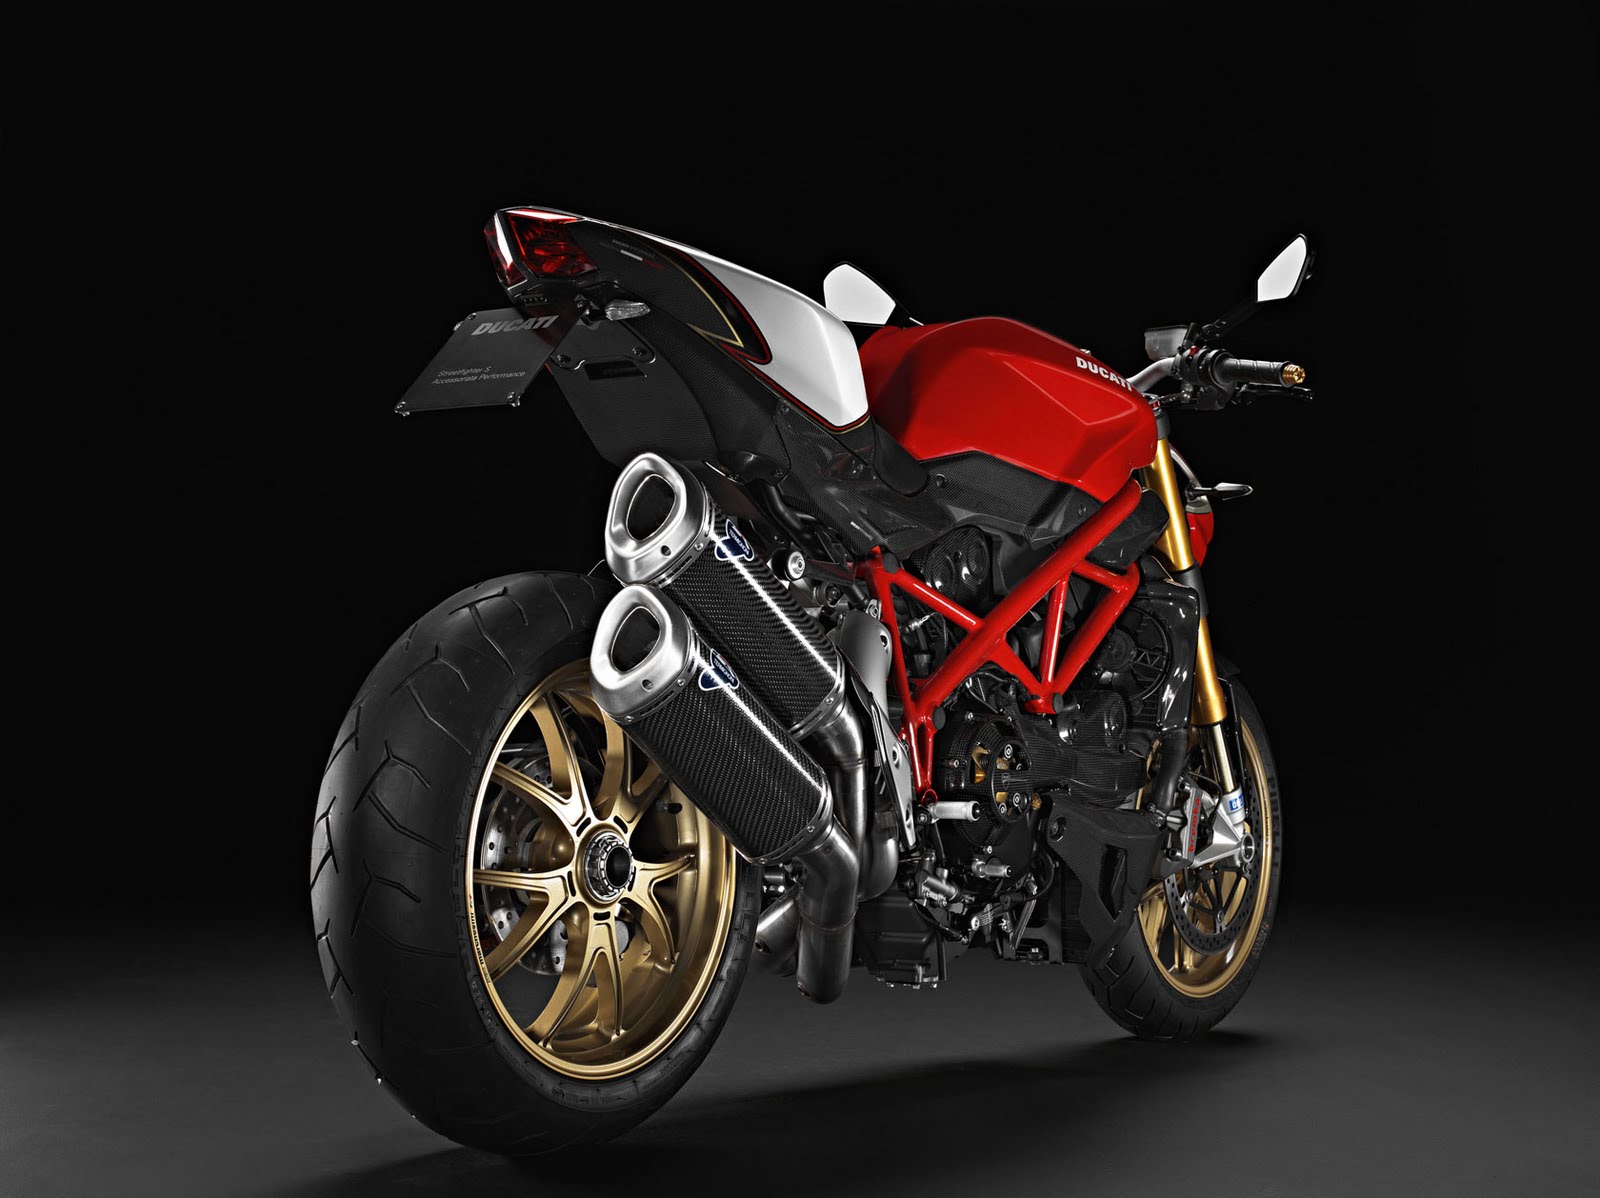 Top Motorcycle Wallpapers: 2011 Ducati Streetfighter S Motorcycle